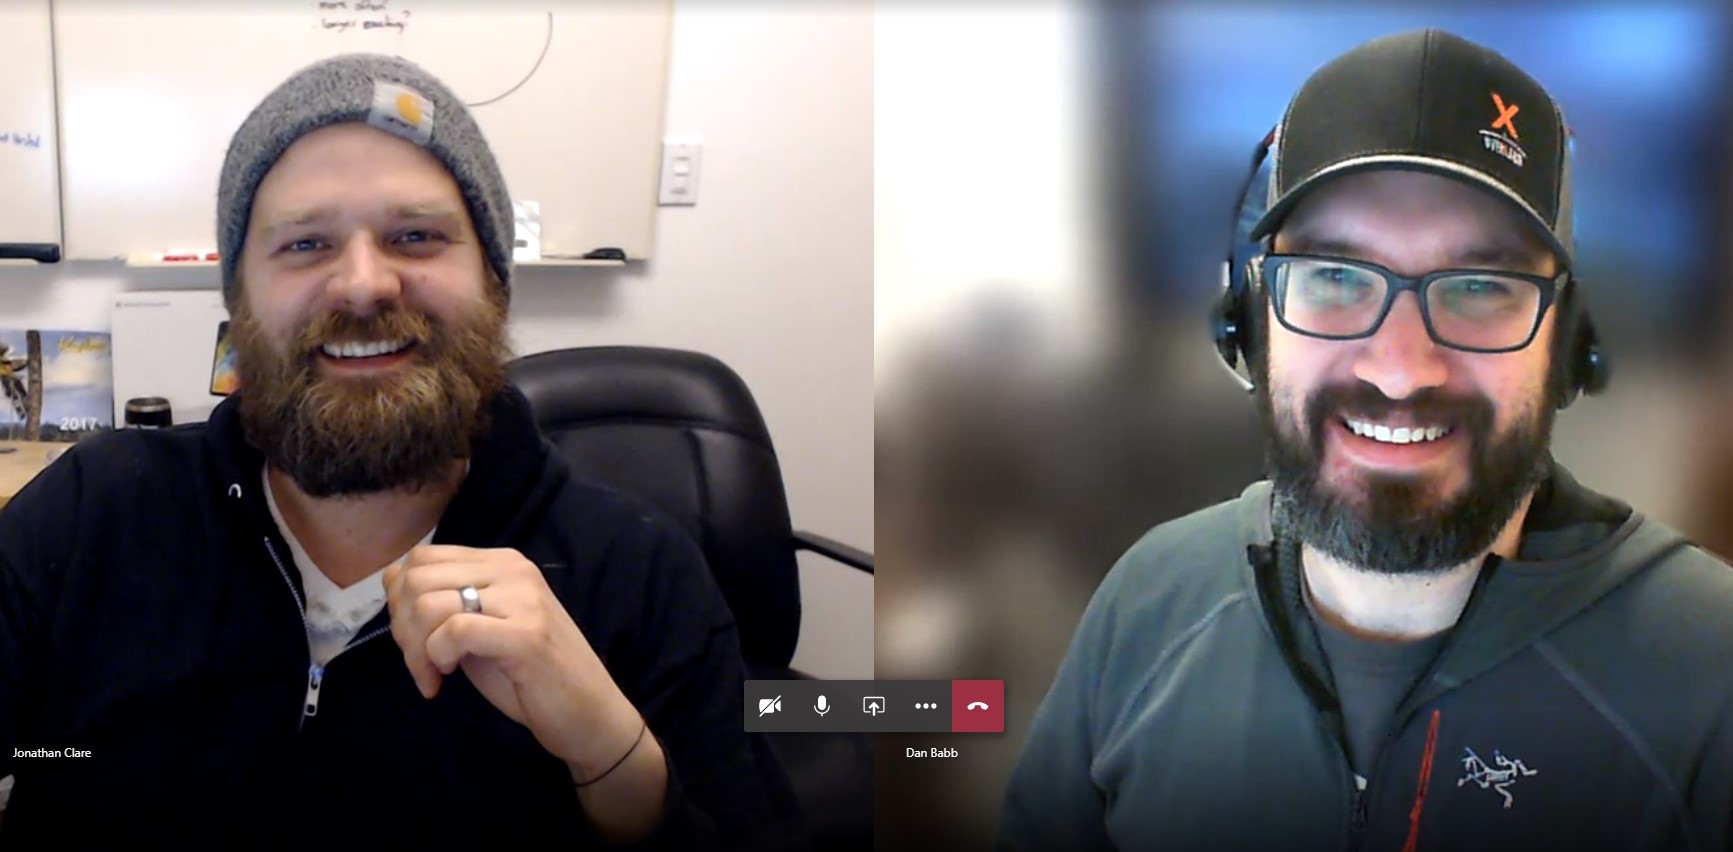 A screenshot shows Clare on the left and Babb on the right. Both are wearing headphones and appear next to each in a two photo-phot format spliced together in one shot by Microsoft Teams.